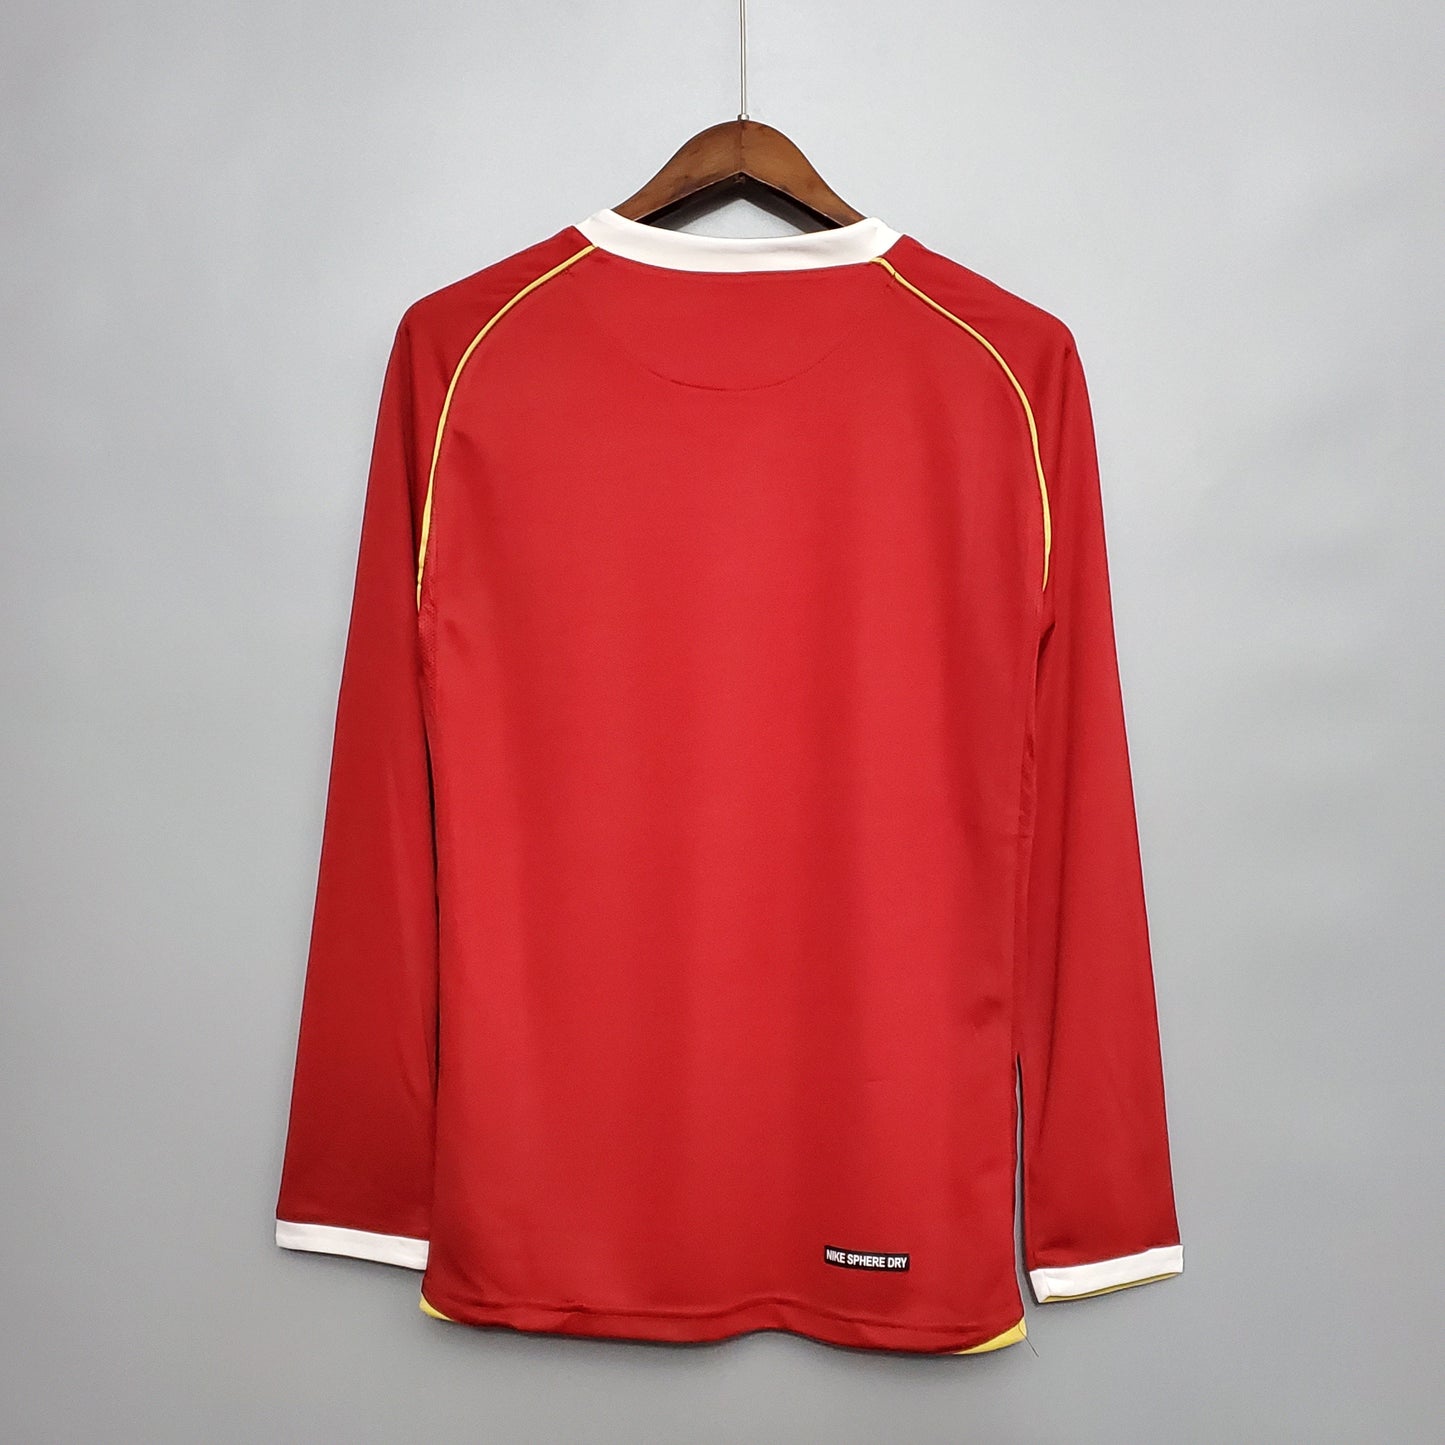 Retro Manchester United Home Long Sleeve 06/07